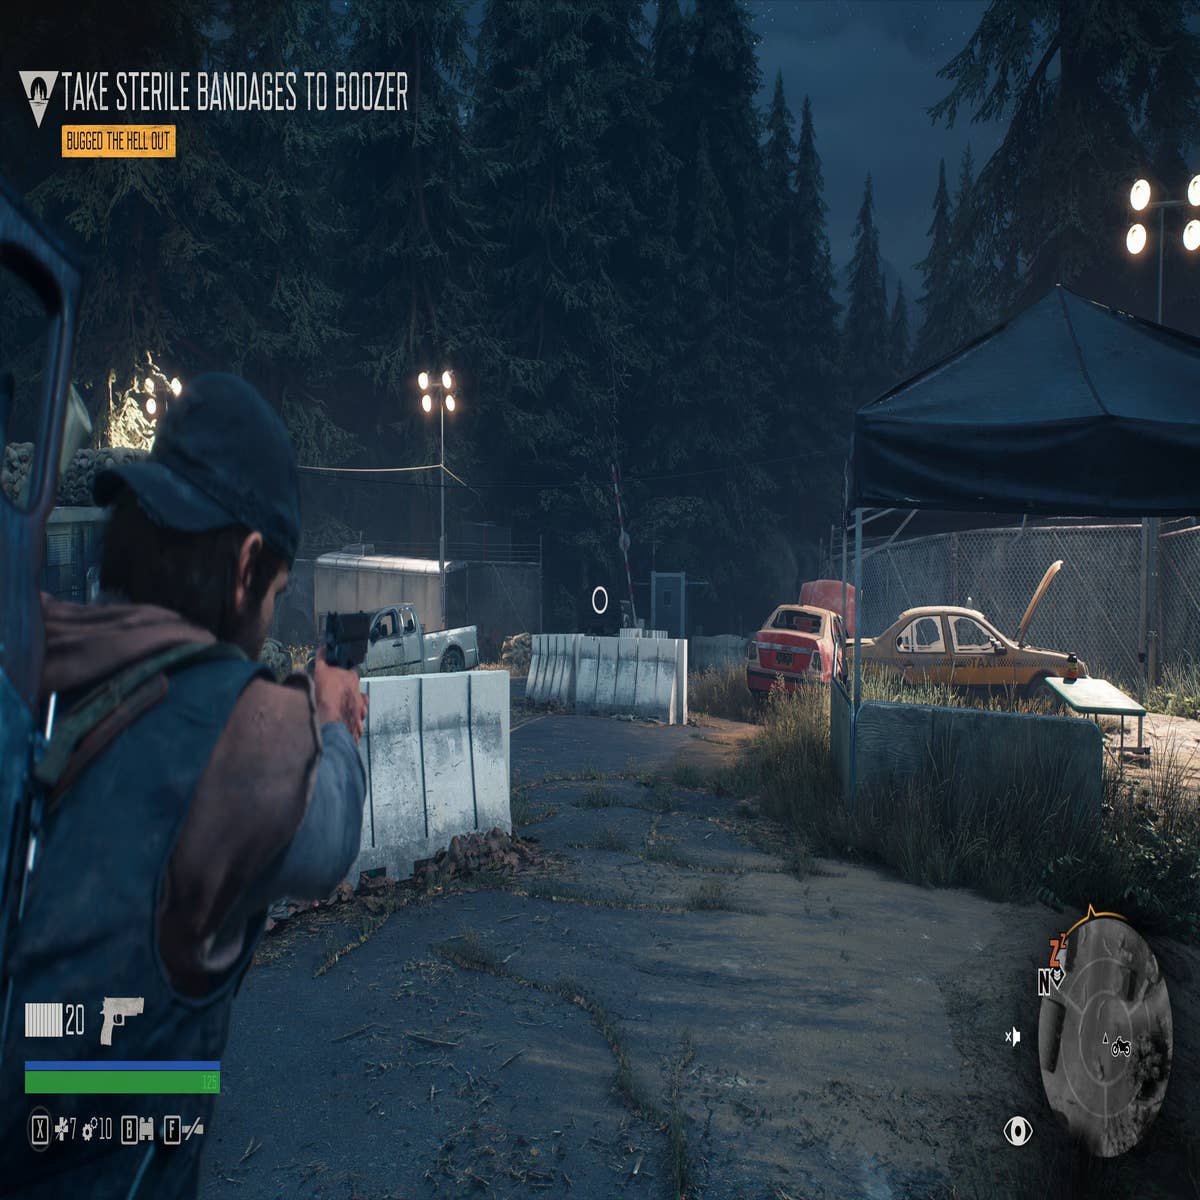 Days Gone PC: a quality conversion that elevates the console experience